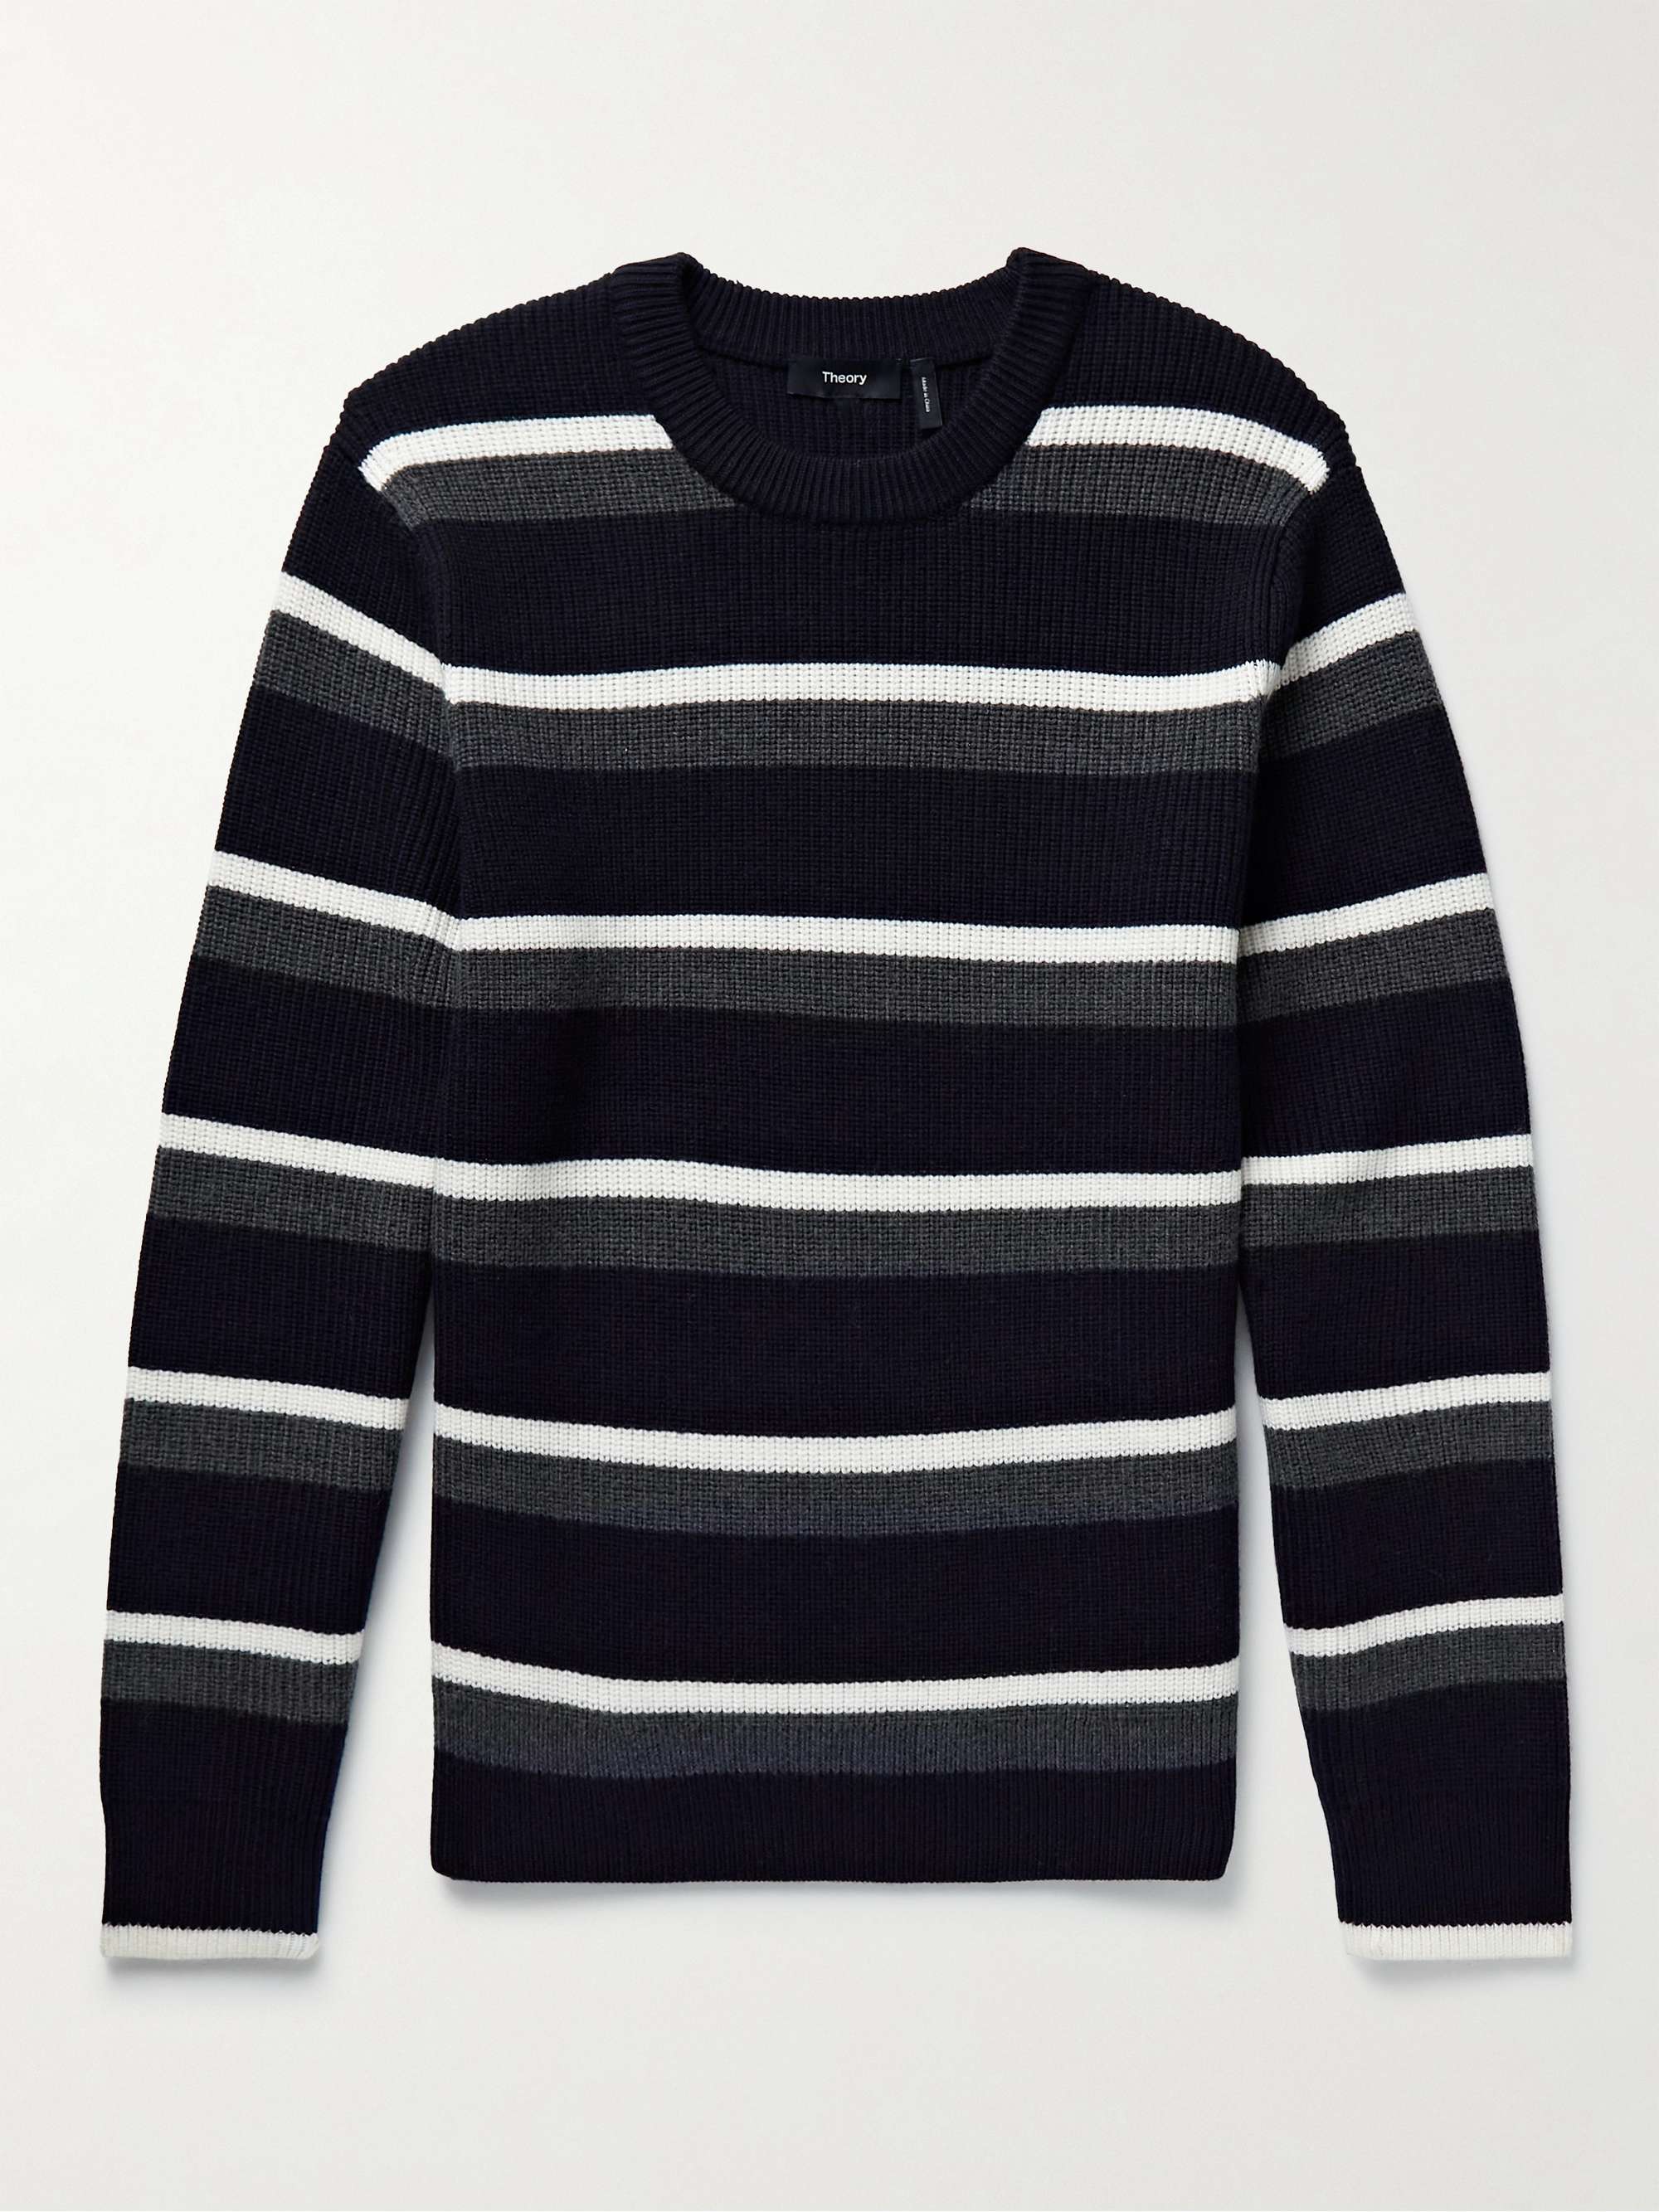 Black Gary Ribbed Striped Wool Sweater | THEORY | MR PORTER